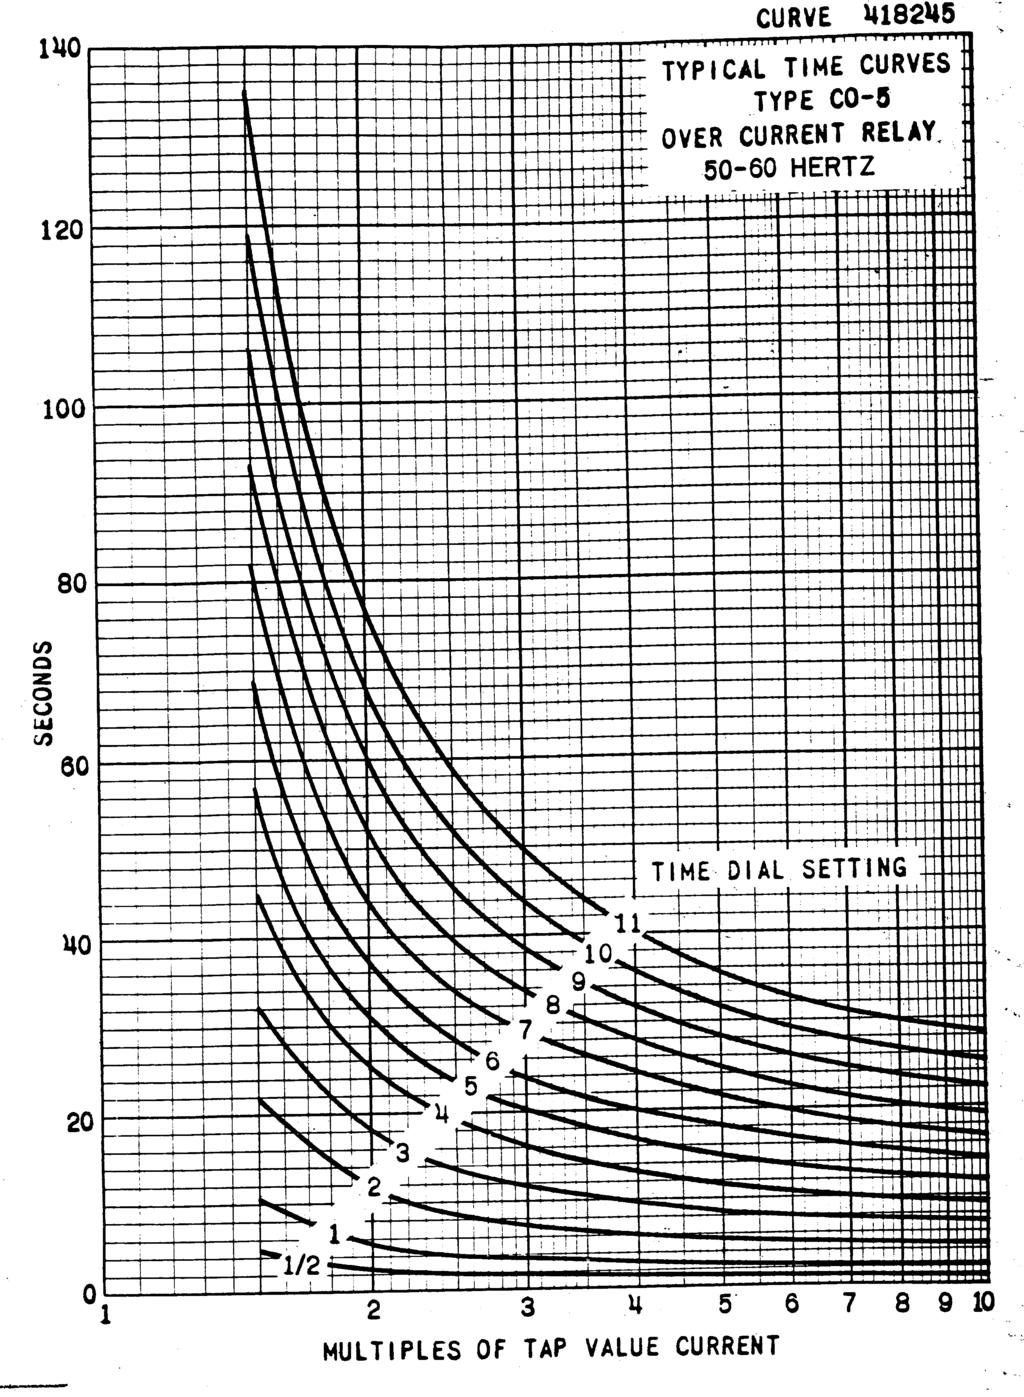 Sub 2 418245 Figure 17: Typical Time Curves of the